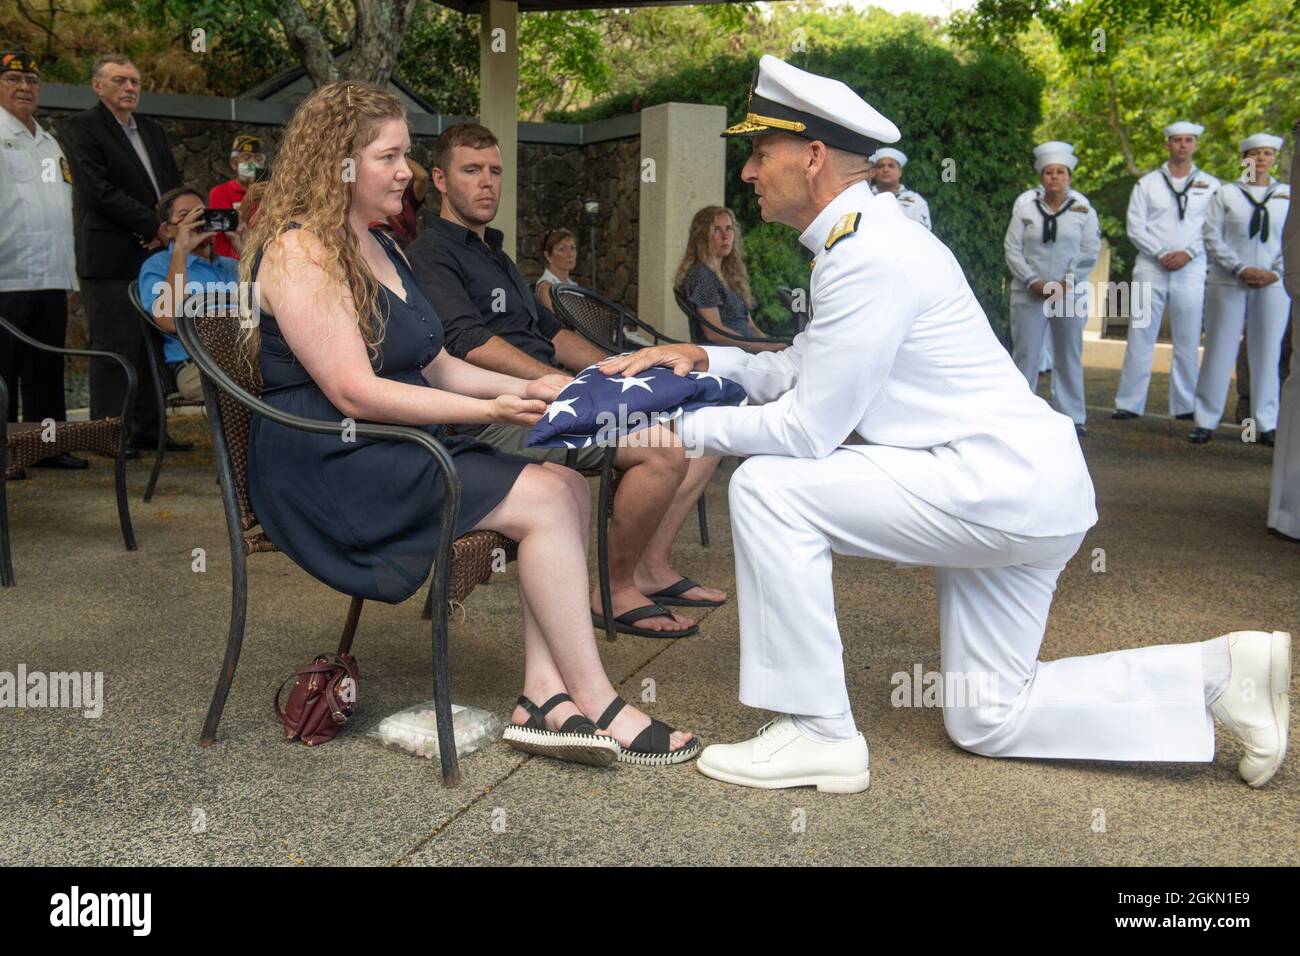 Sarah Adams, great-grandniece of U.S. Navy Gunner’s Mate 3rd Class Shelby Treadway, 25, of Manchester, Kentucky, is presented a flag by sailors assigned to Navy Region Hawaii during her granduncle's funeral at the National Memorial Cemetery of the Pacific, Honolulu, Hawaii, June 2, 2021. Treadway was assigned to the USS Oklahoma, which sustained fire from Japanese aircraft and multiple torpedo hits causing the ship to capsize and resulted in the deaths of more than 400 crew members on Dec. 7, 1941, at Ford Island, Pearl Harbor. Treadway was recently identified through DNA analysis by the DPAA Stock Photo